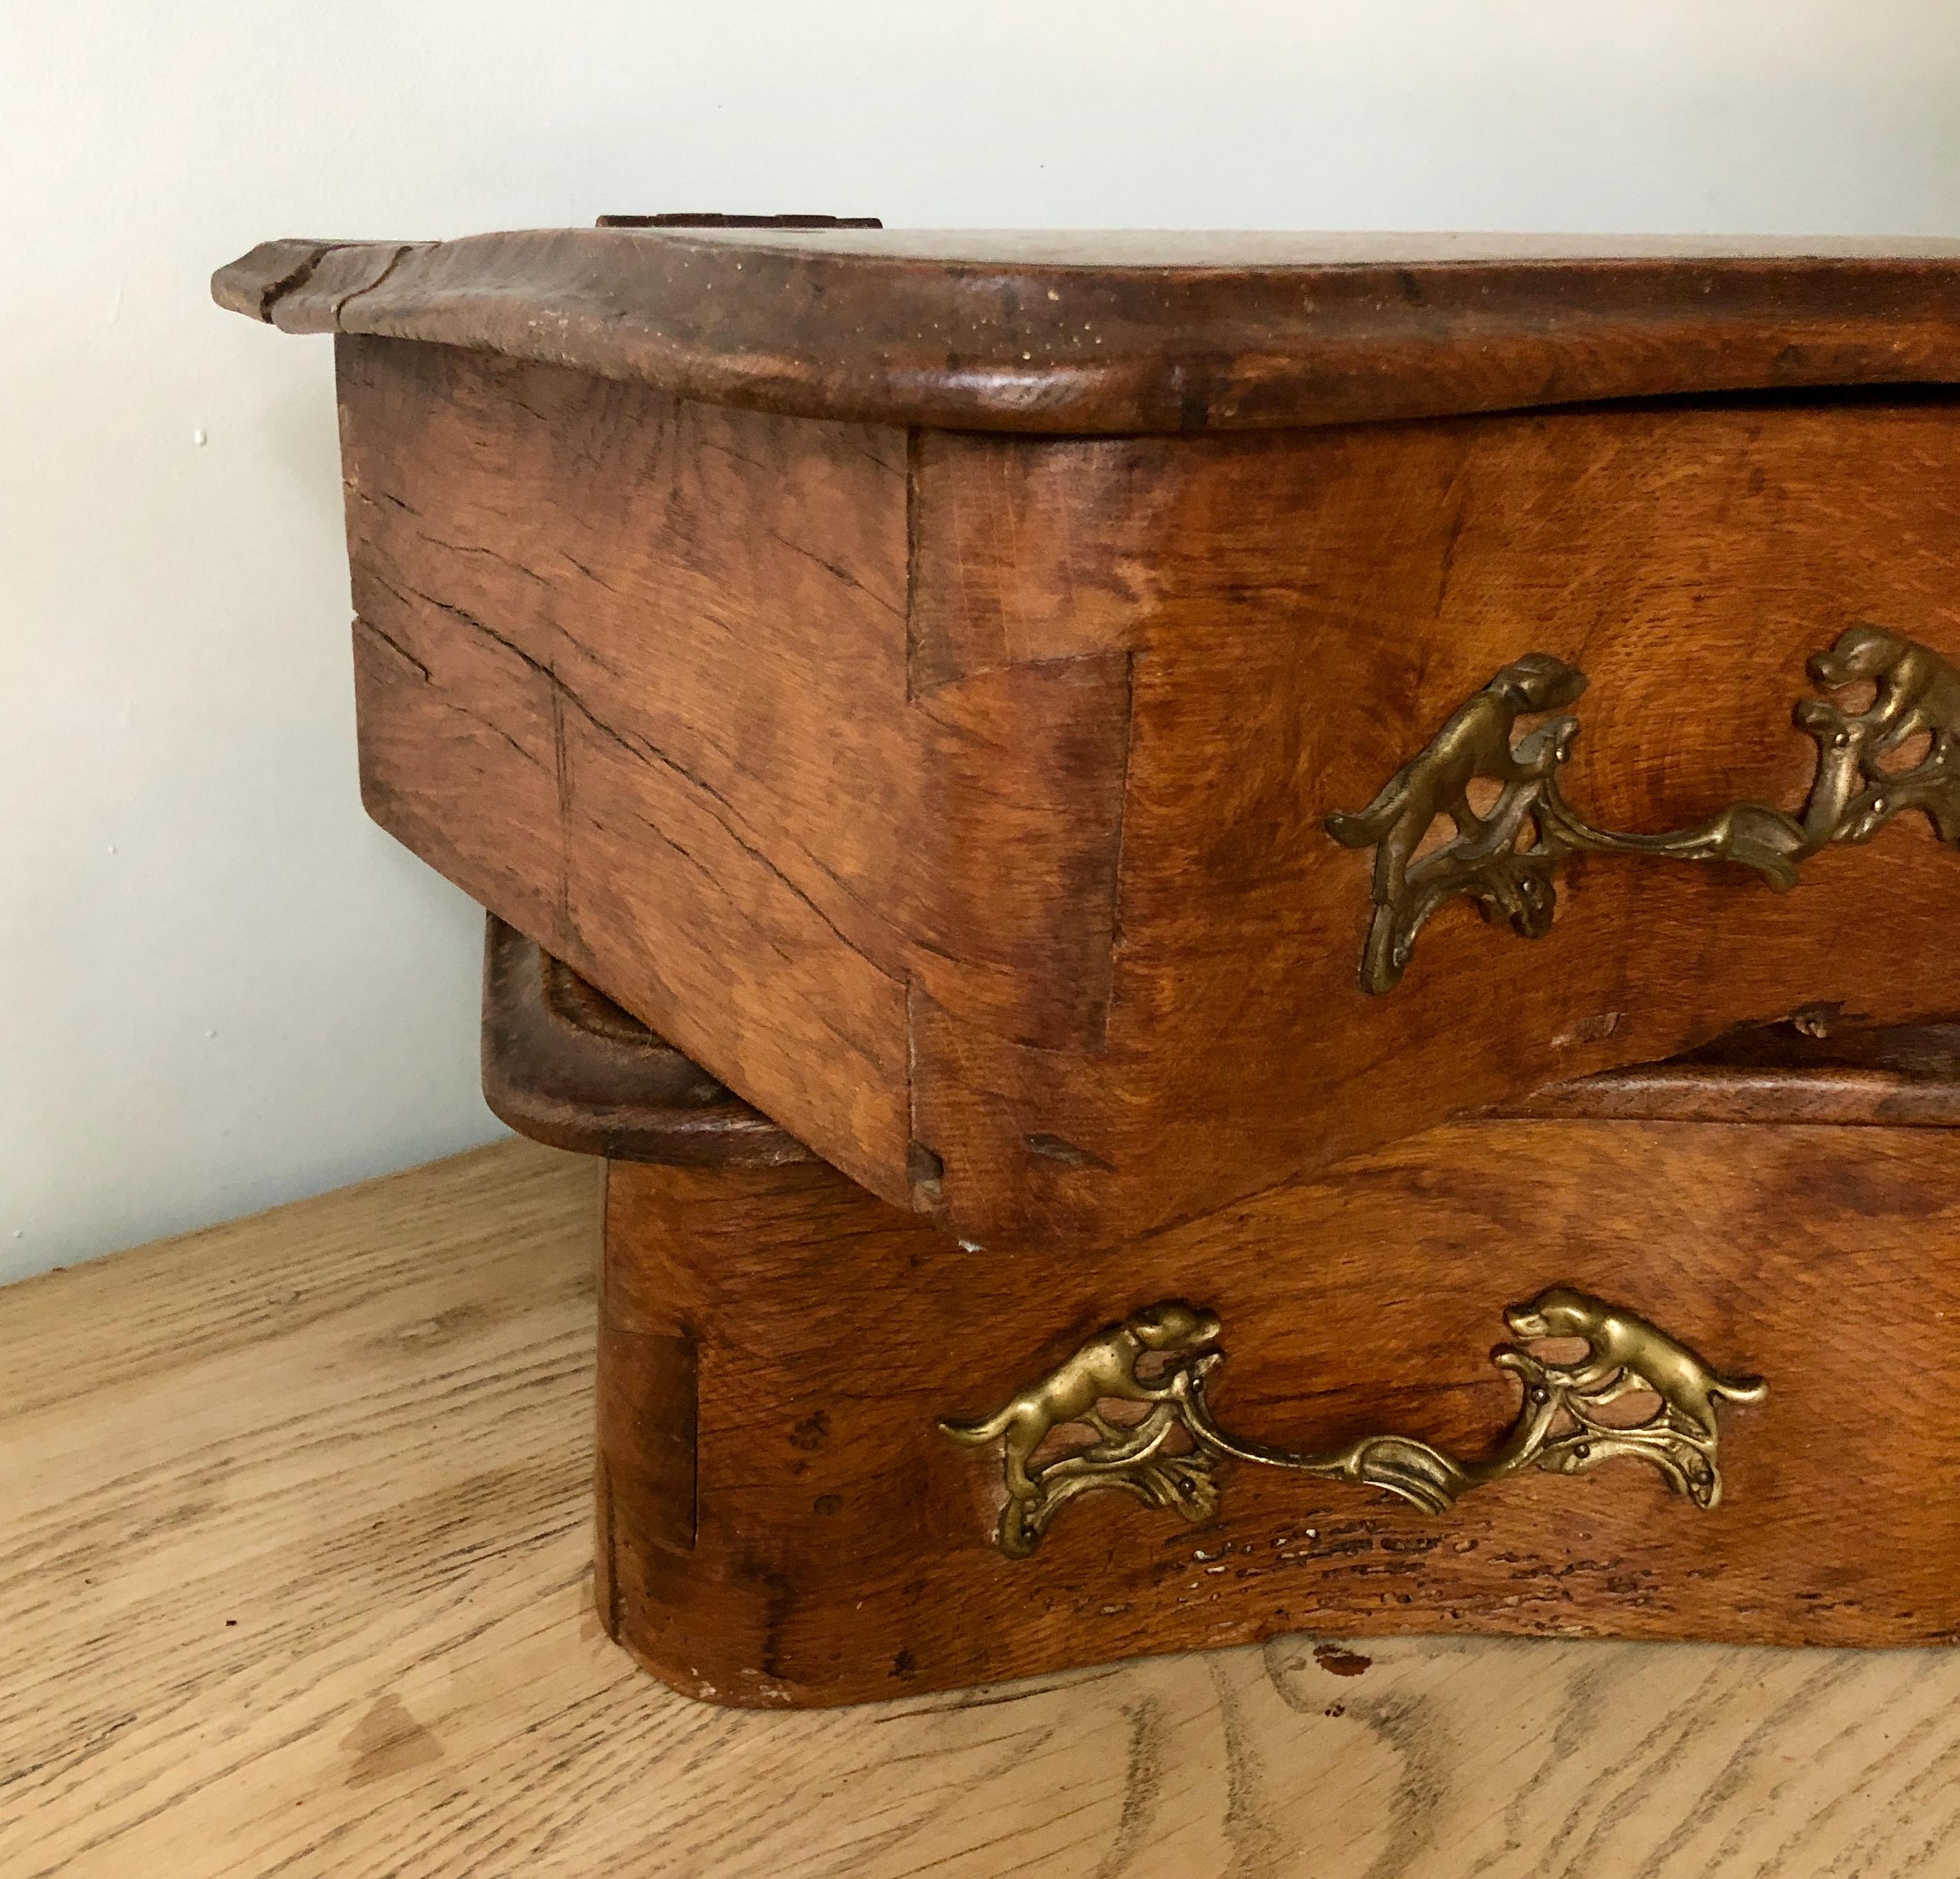 A rare pair of 19th century or earlier valet drawer boxes with carved oak in curvaceous serpentine drawers with original bronze hardwares.